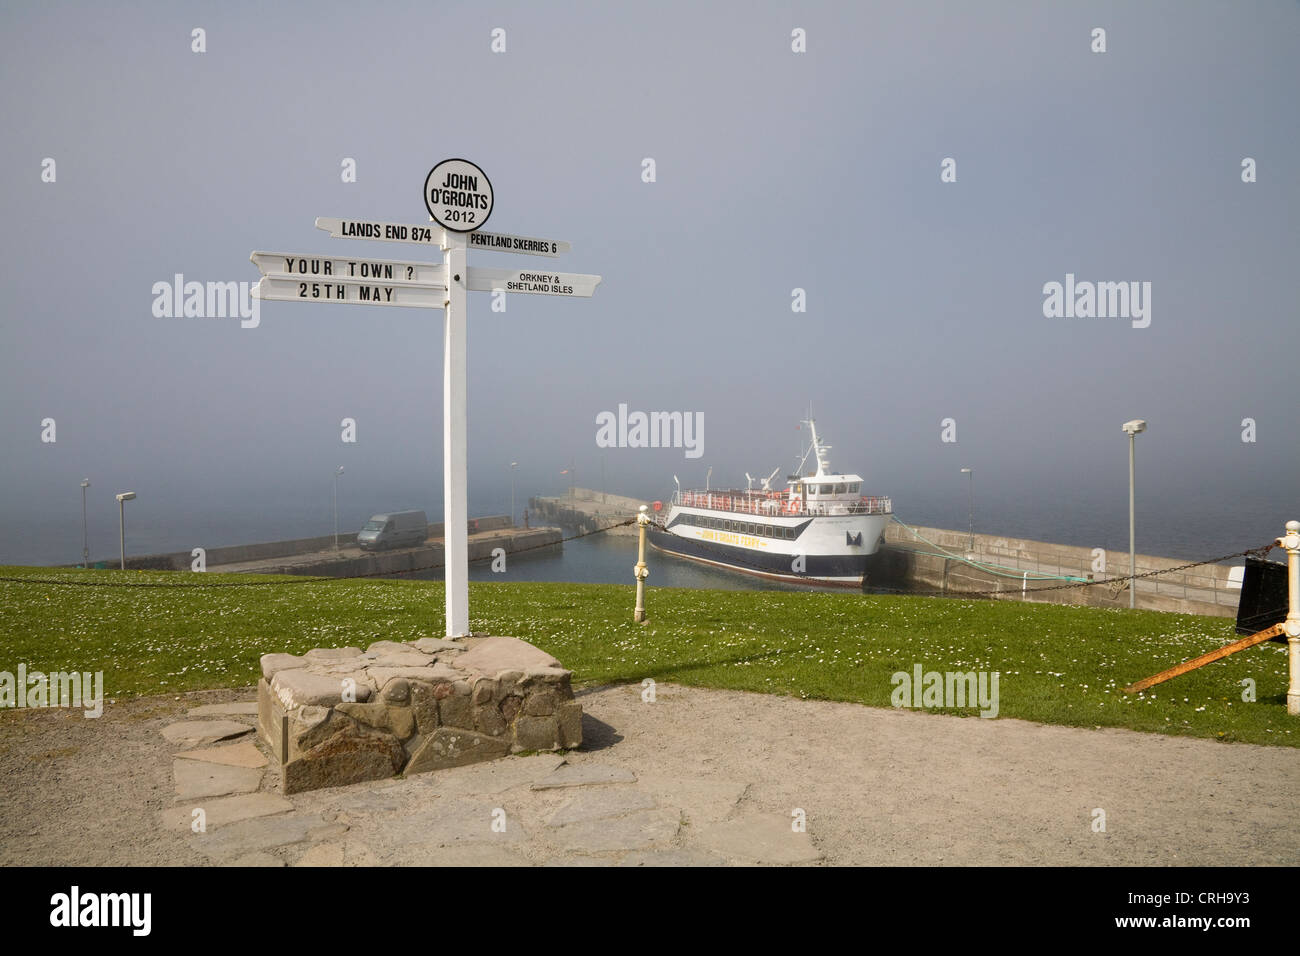 John o' Groats Caithness Scotland May Signpost in front of Pentland Venture passenger ferry on misty day Stock Photo